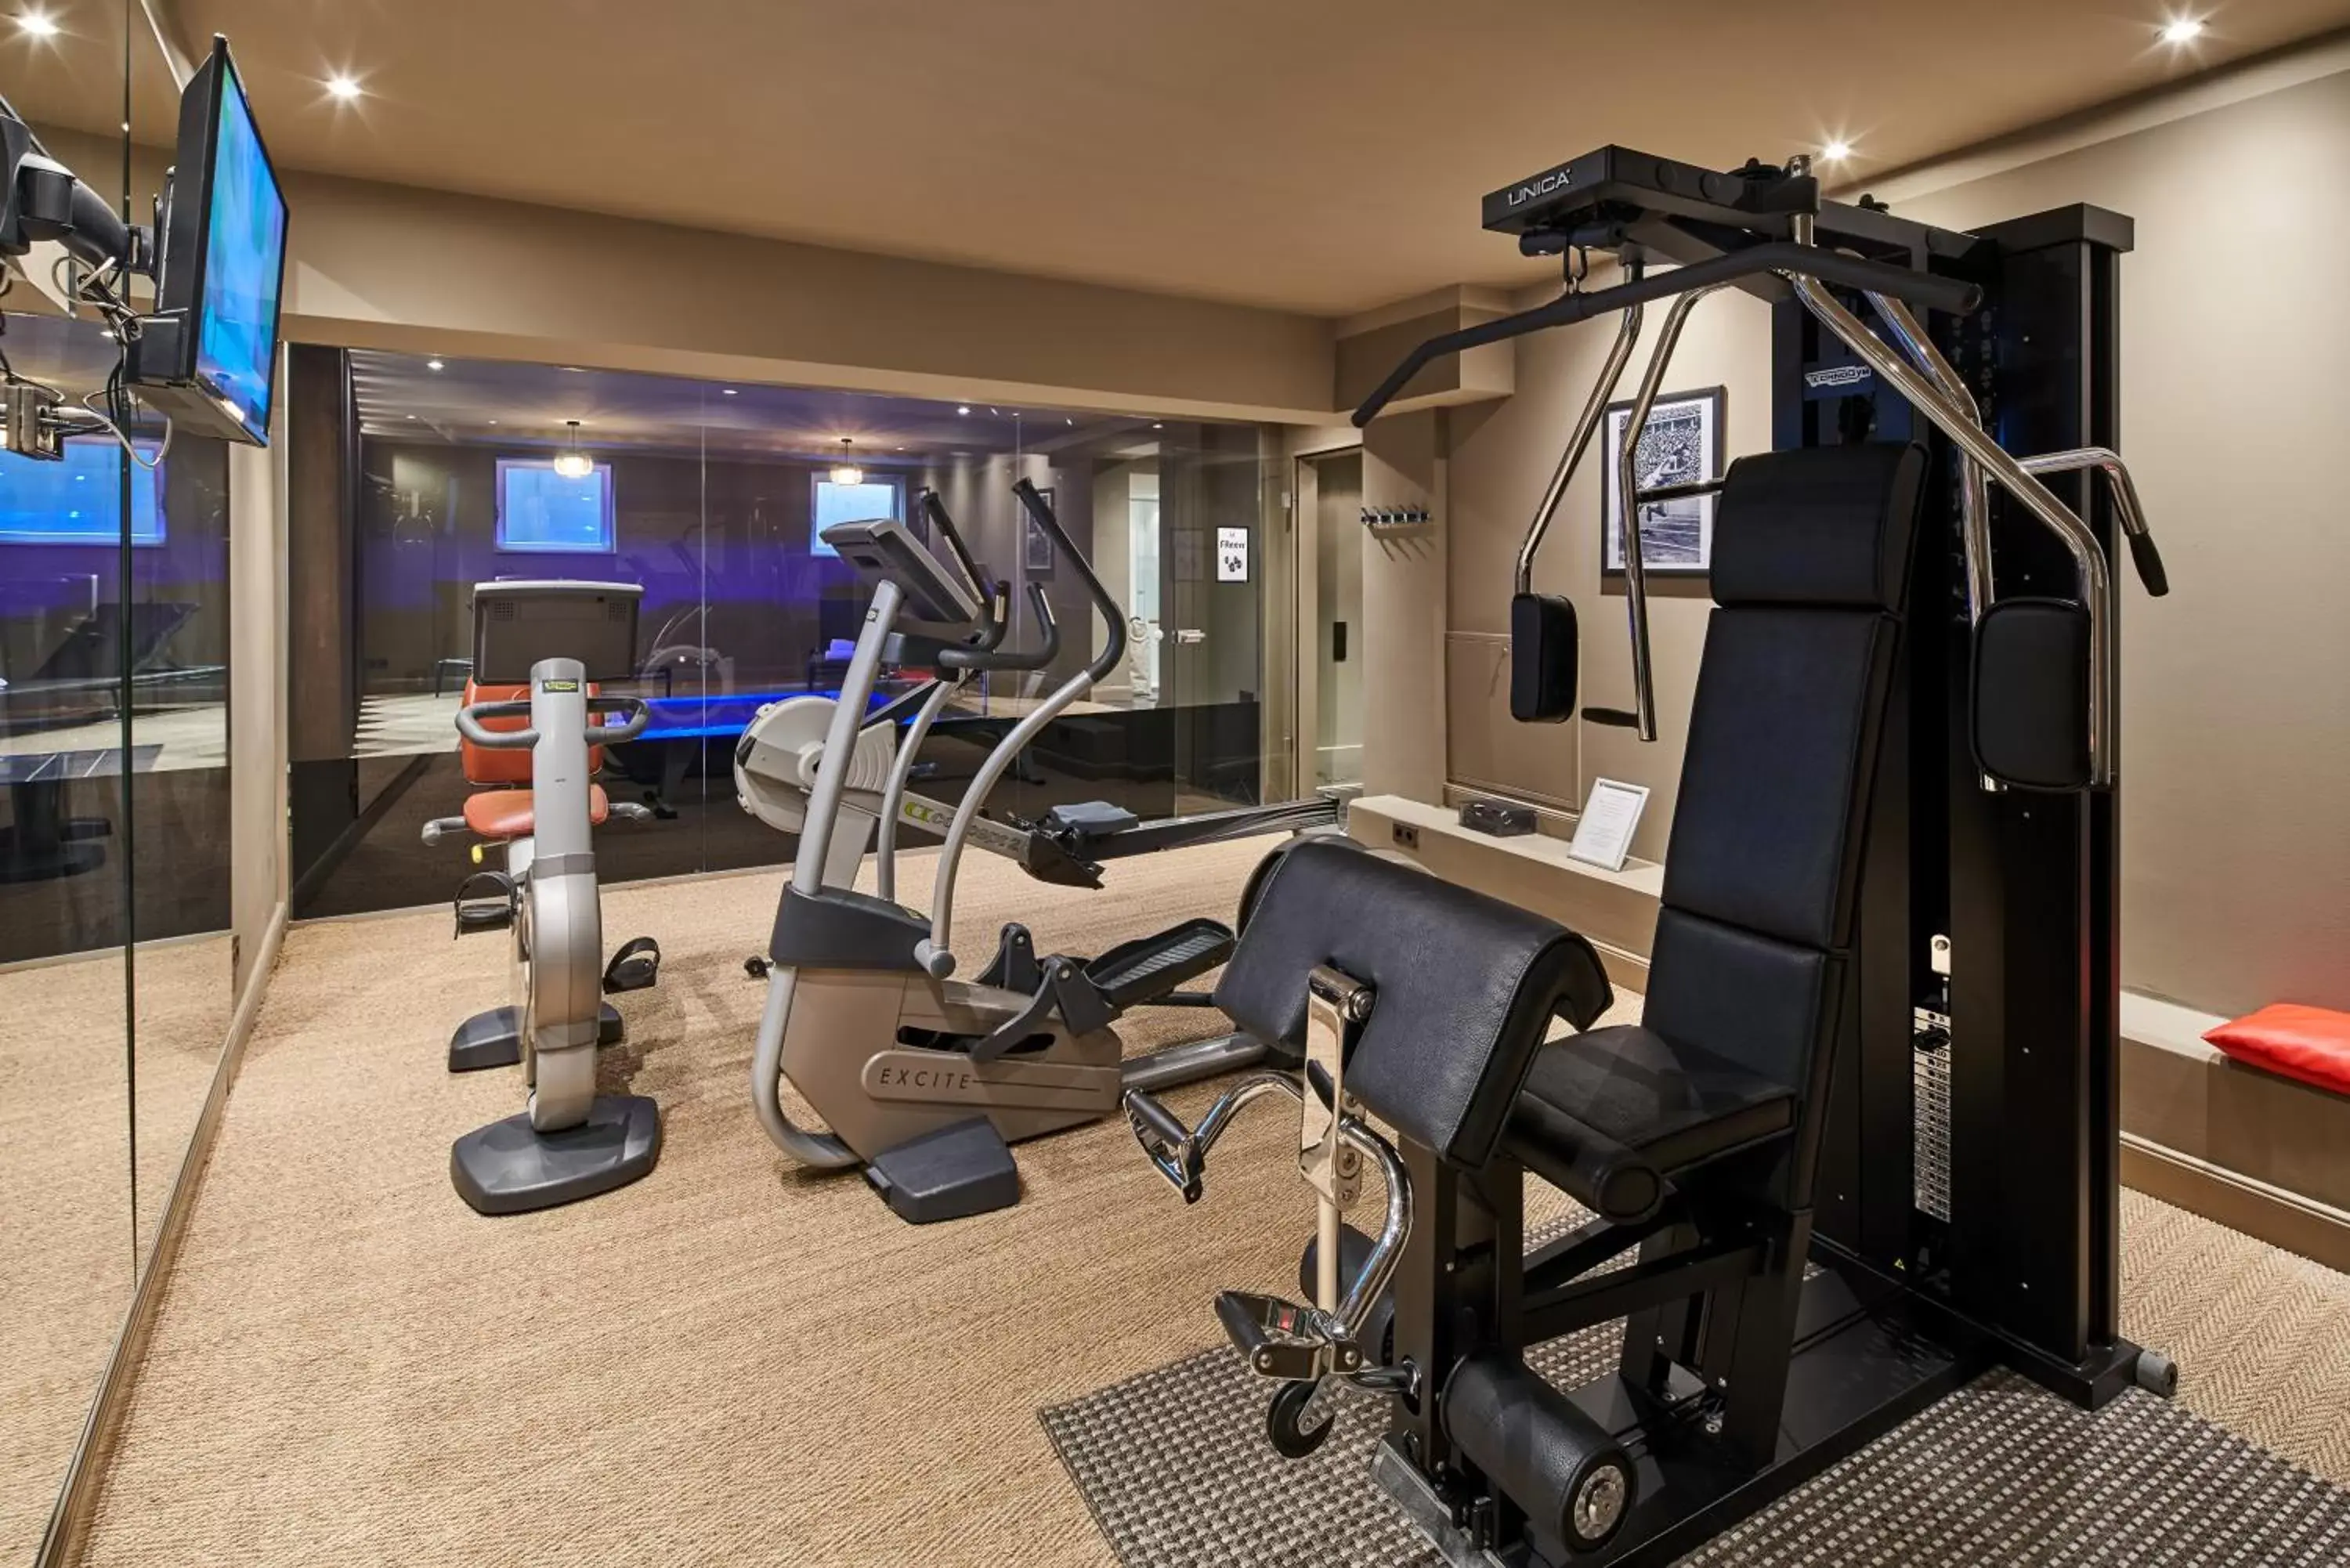 Fitness centre/facilities, Fitness Center/Facilities in Mondrian Suites Berlin am Checkpoint Charlie